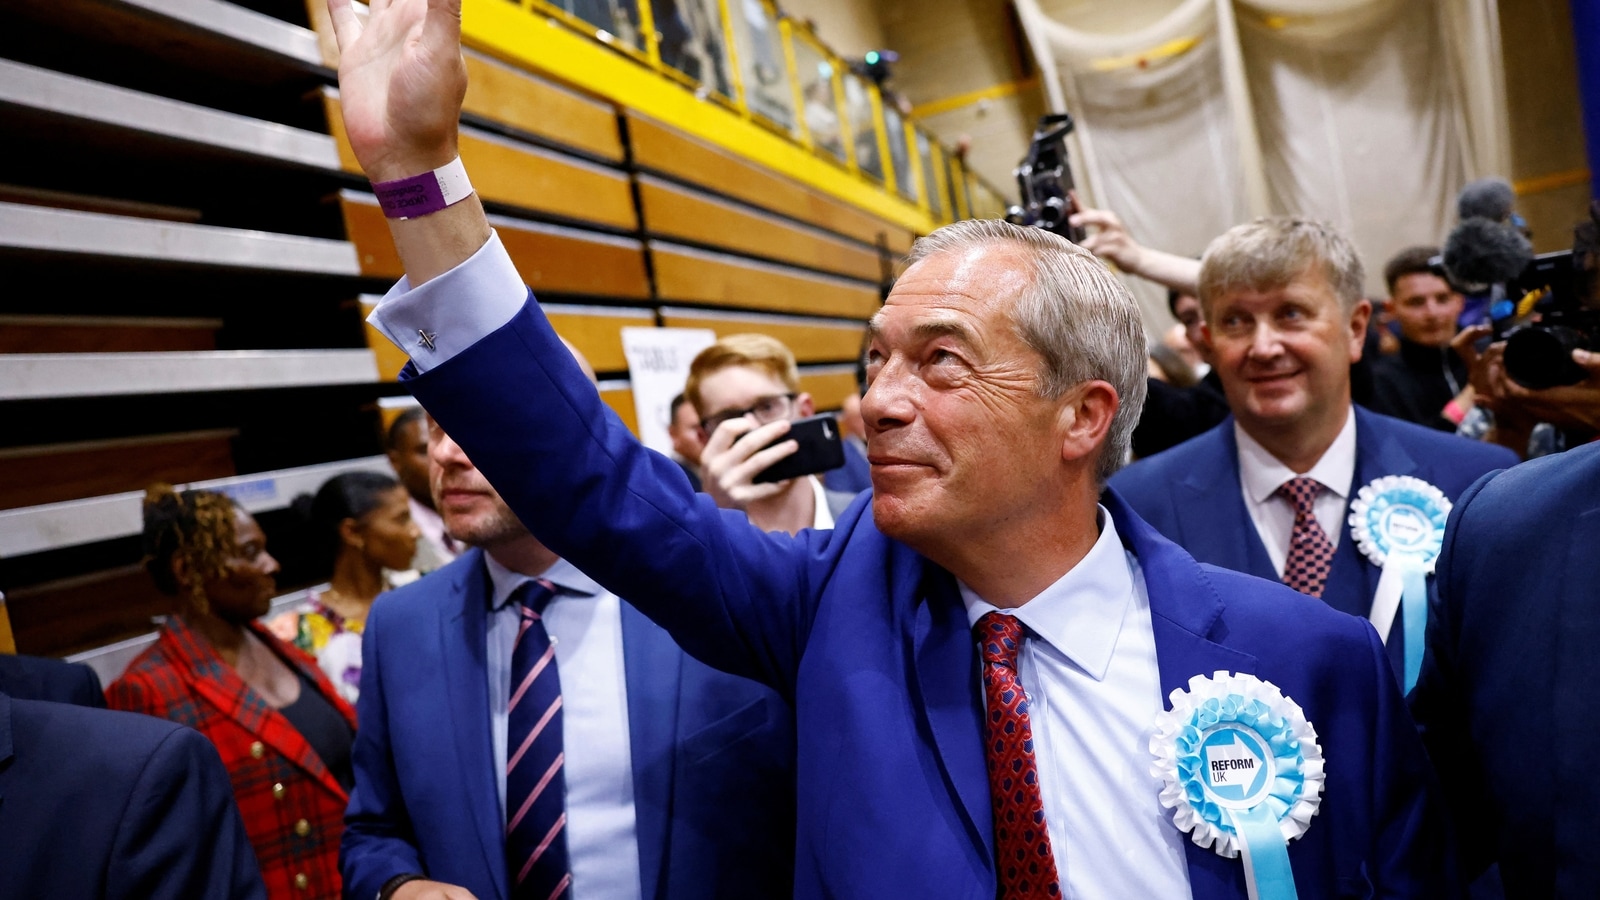 Reform UK leader Nigel Farage secures first Parliament seat on eighth attempt